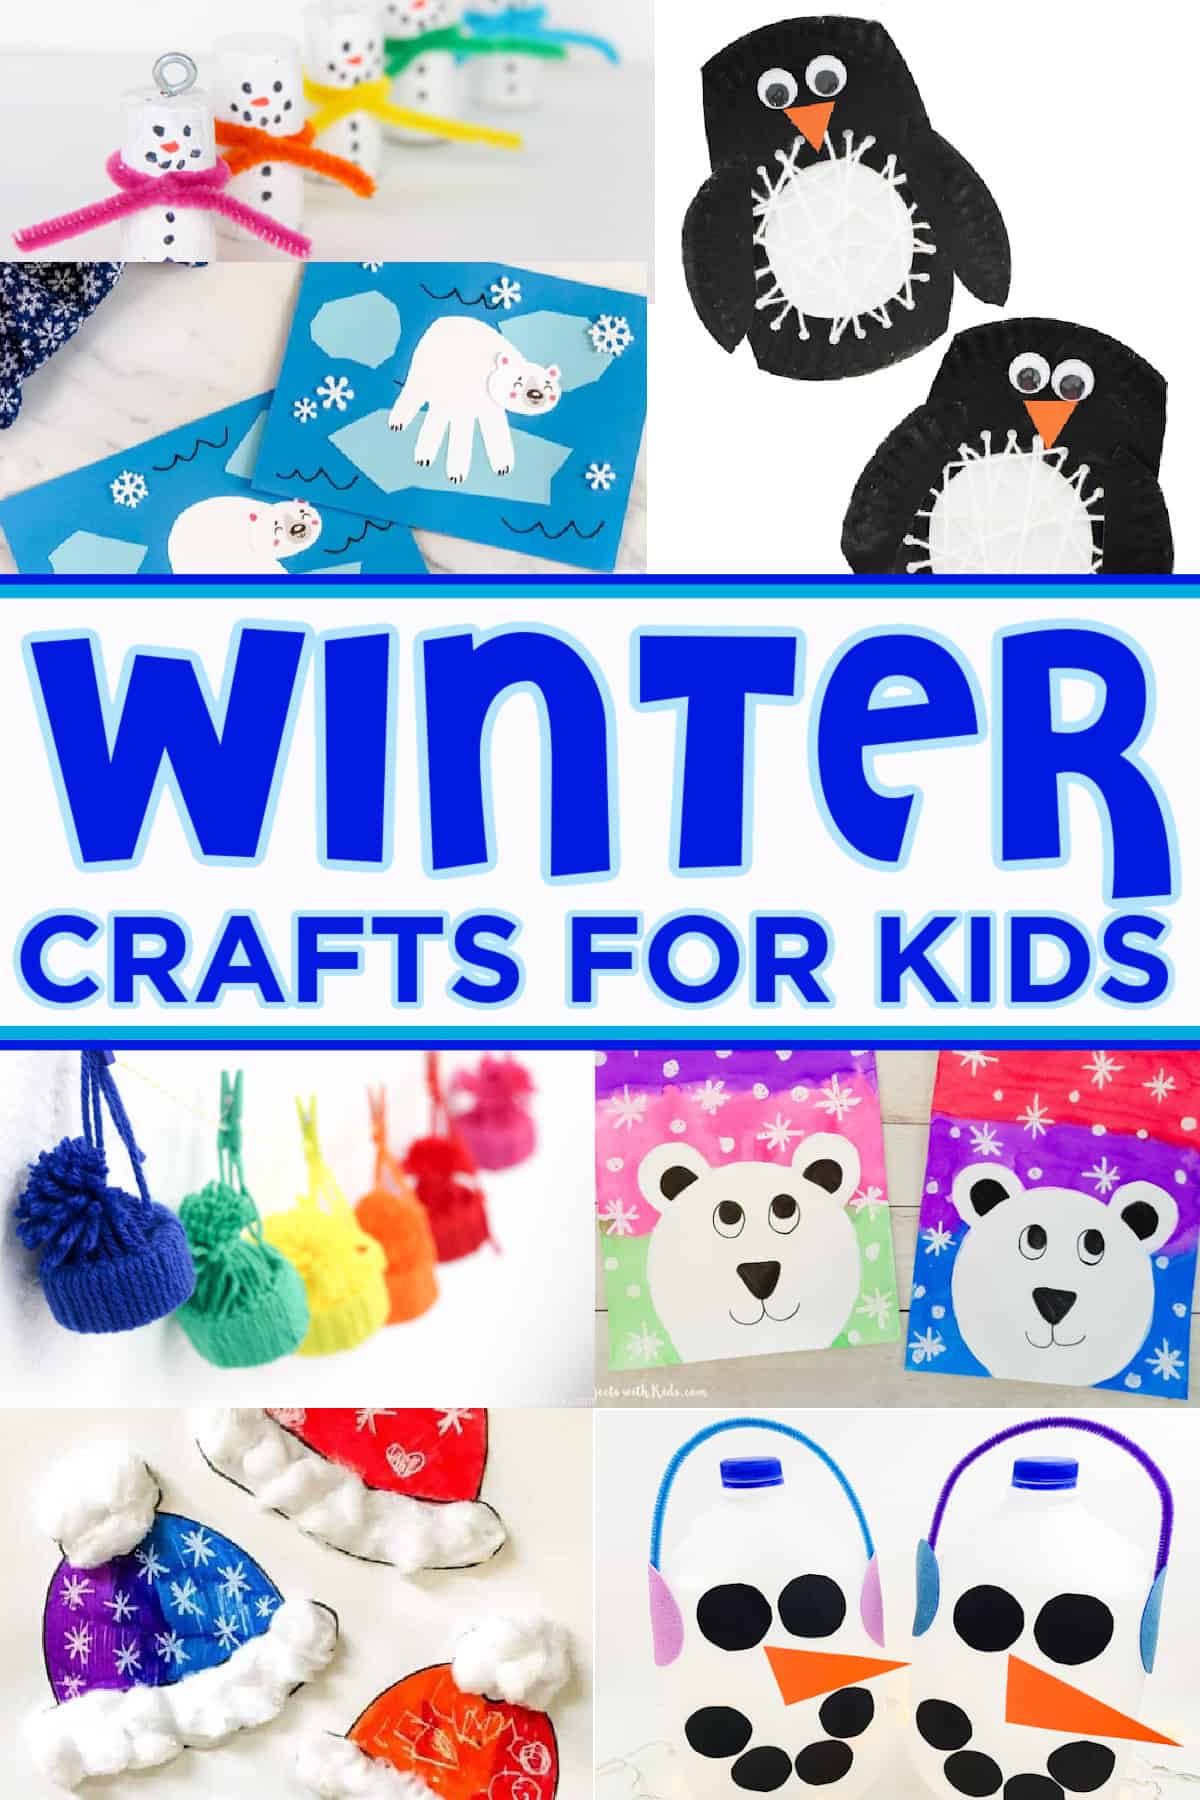 Glitter Crafts For Kids of All Ages